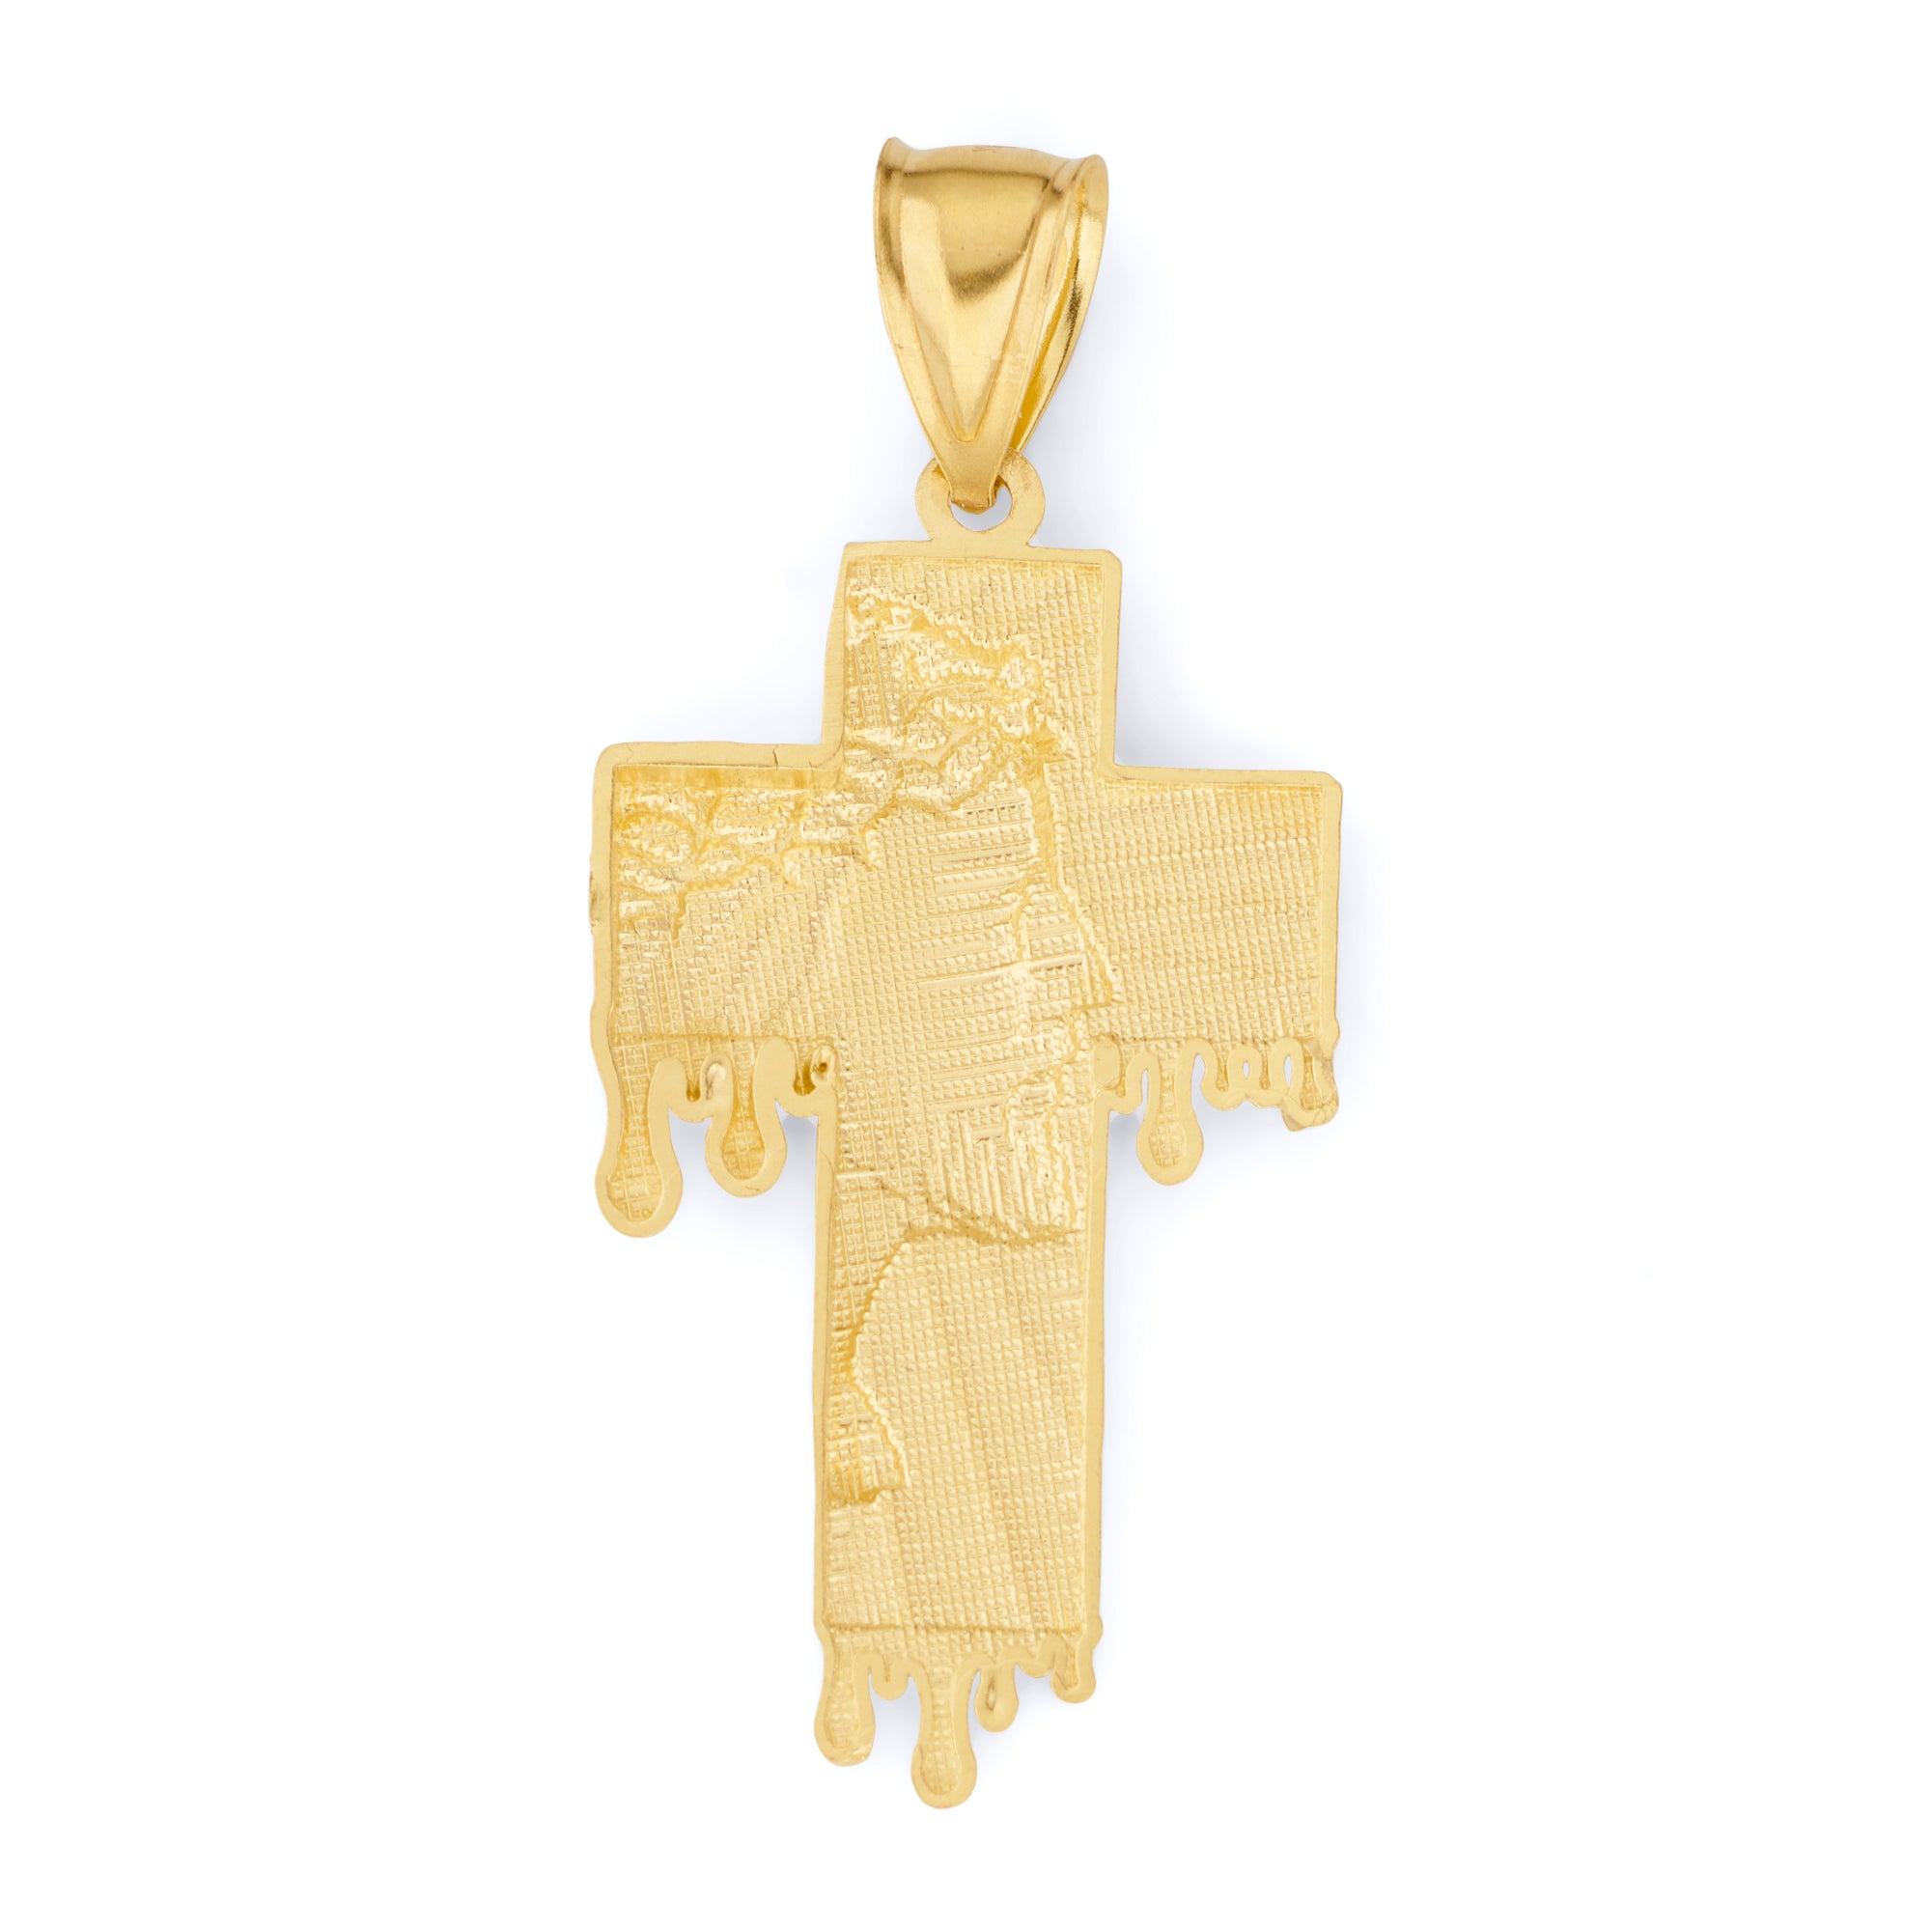 Solid Gold Cross with Jesus Pendant - 10k or 14k